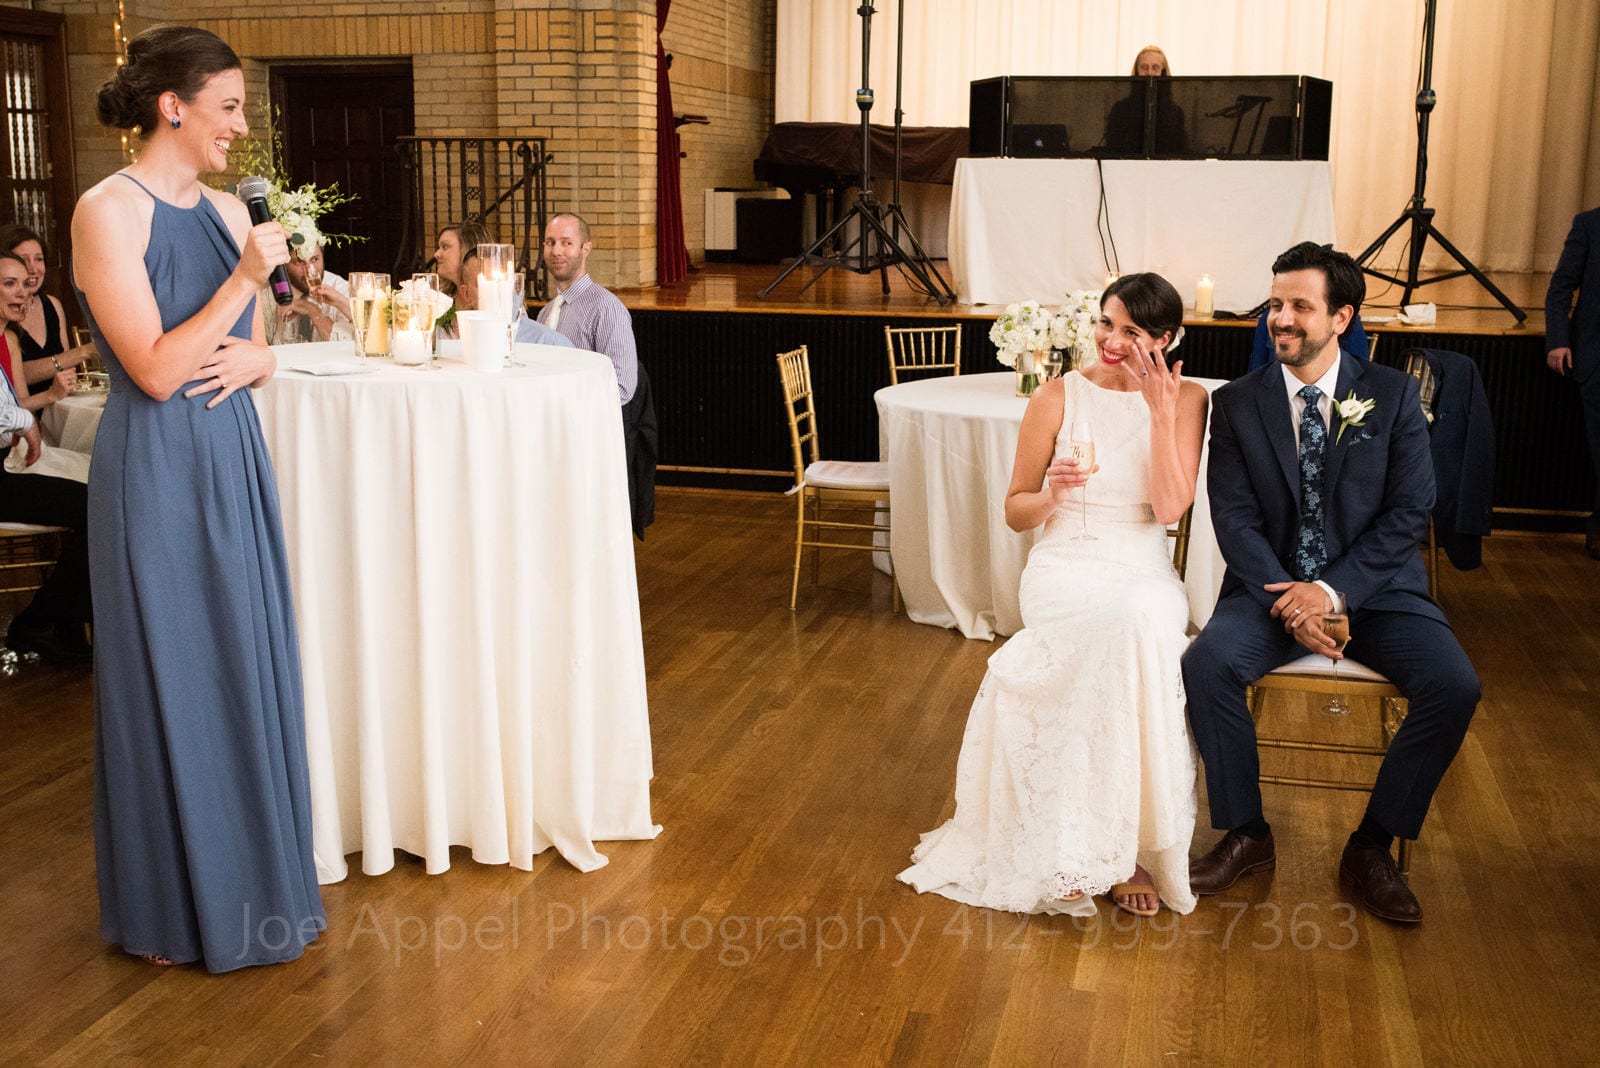 A seated bride wipes a tear as she and her groom listen to a toast from her blue dress wearing matron of honor during their St Francis Hall Washington DC wedding.